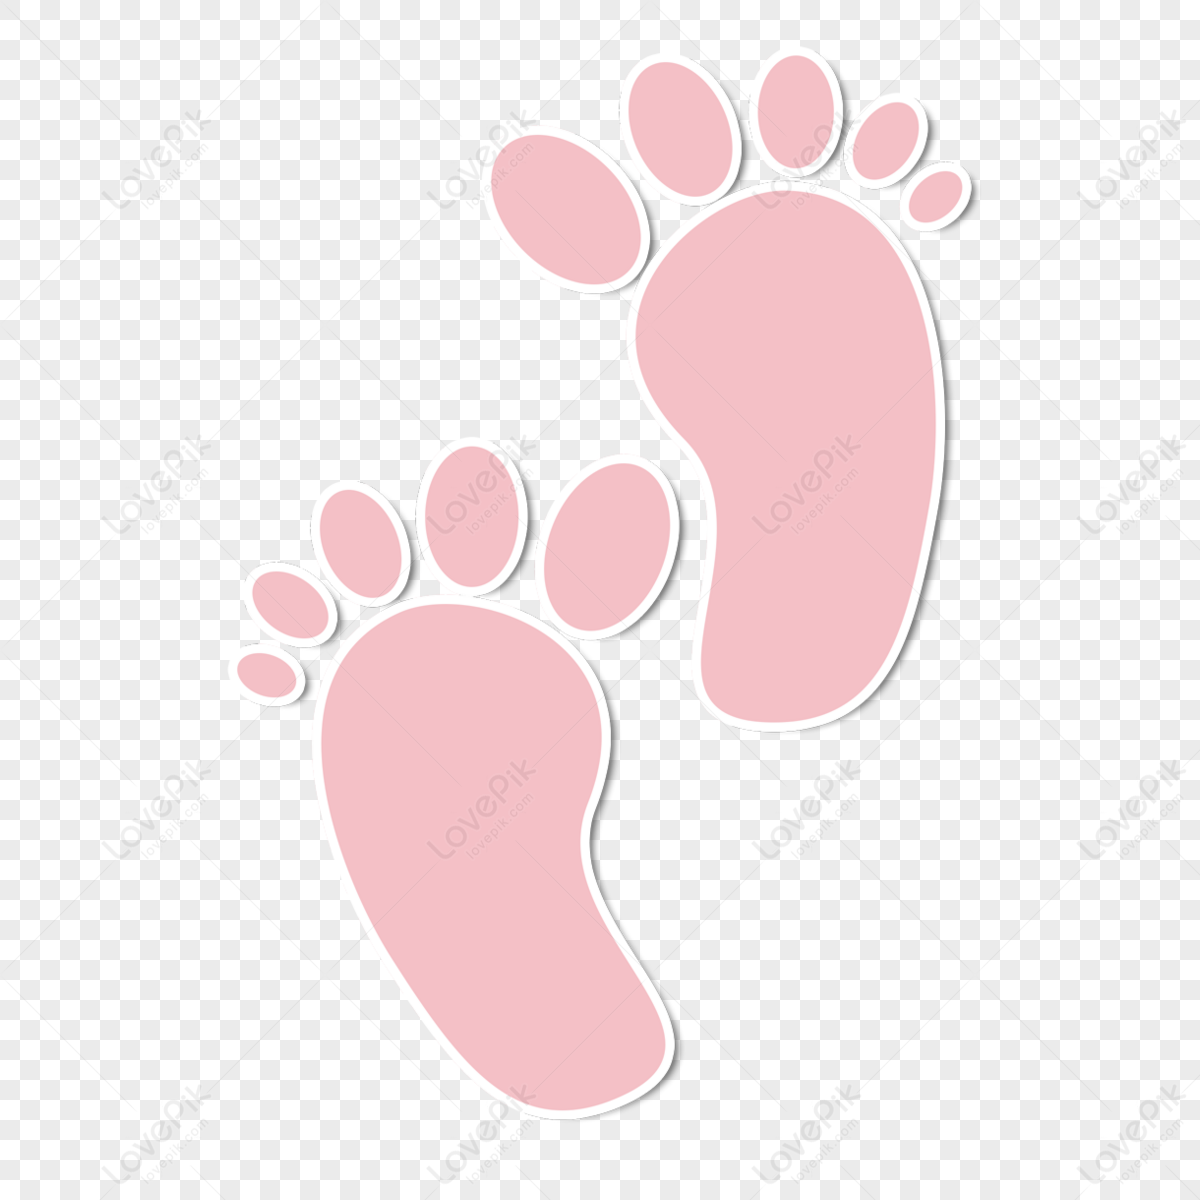 Cartoon Pink Footprints Of Two Children,decoration Free PNG And Clipart ...